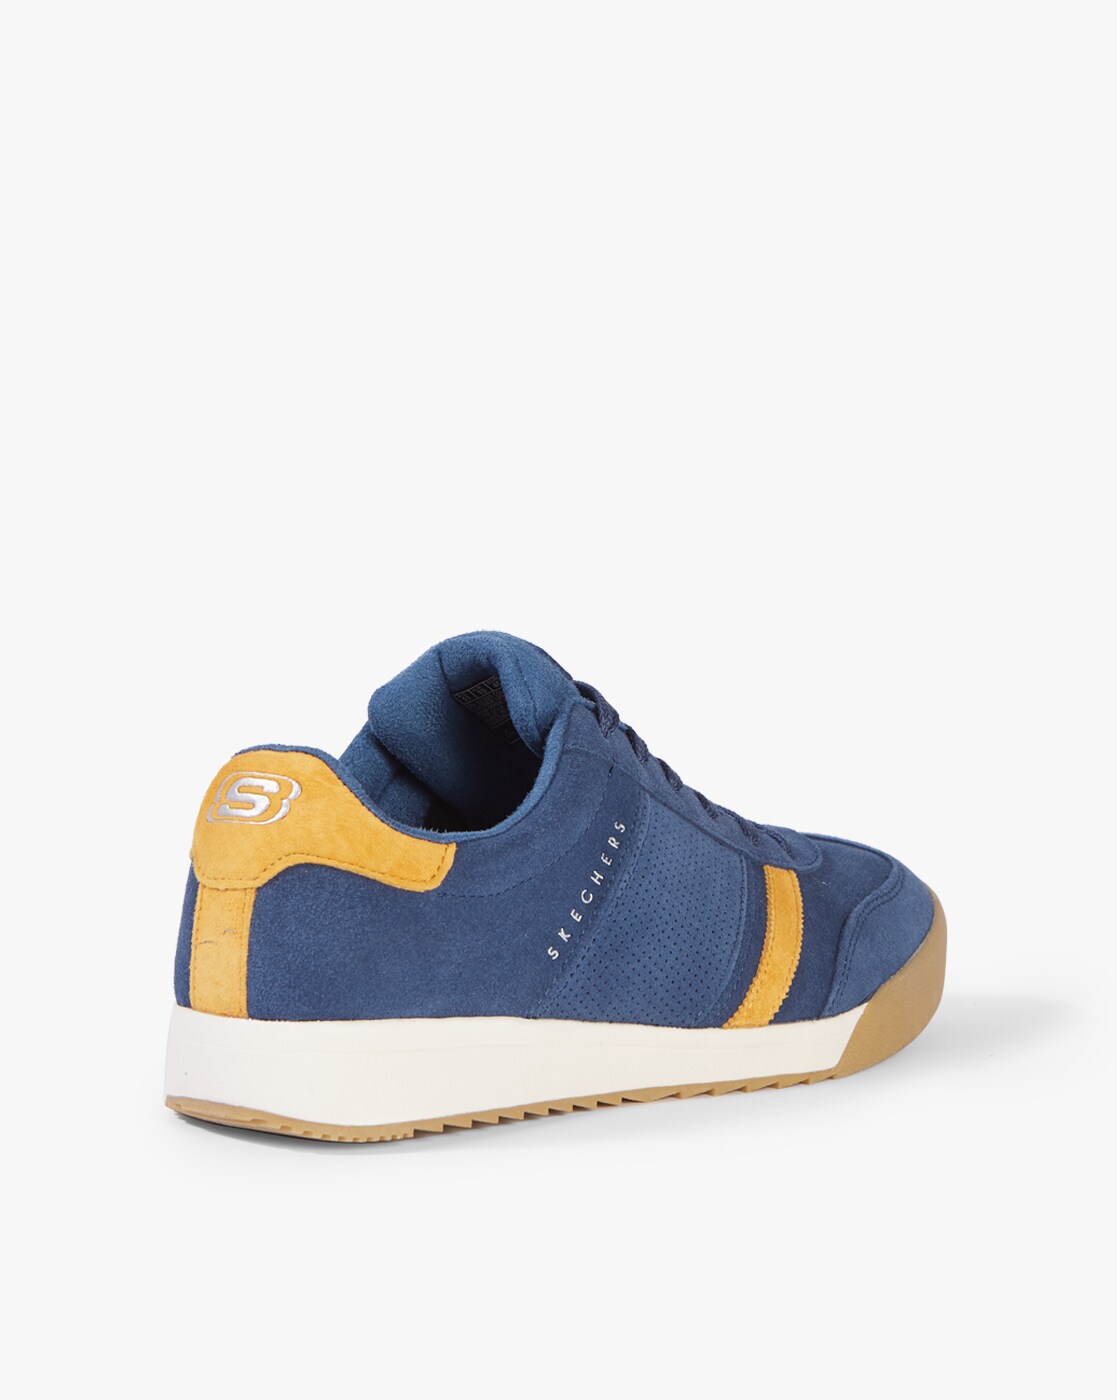 Buy Navy Blue Sports Shoes for Men by Skechers Online |